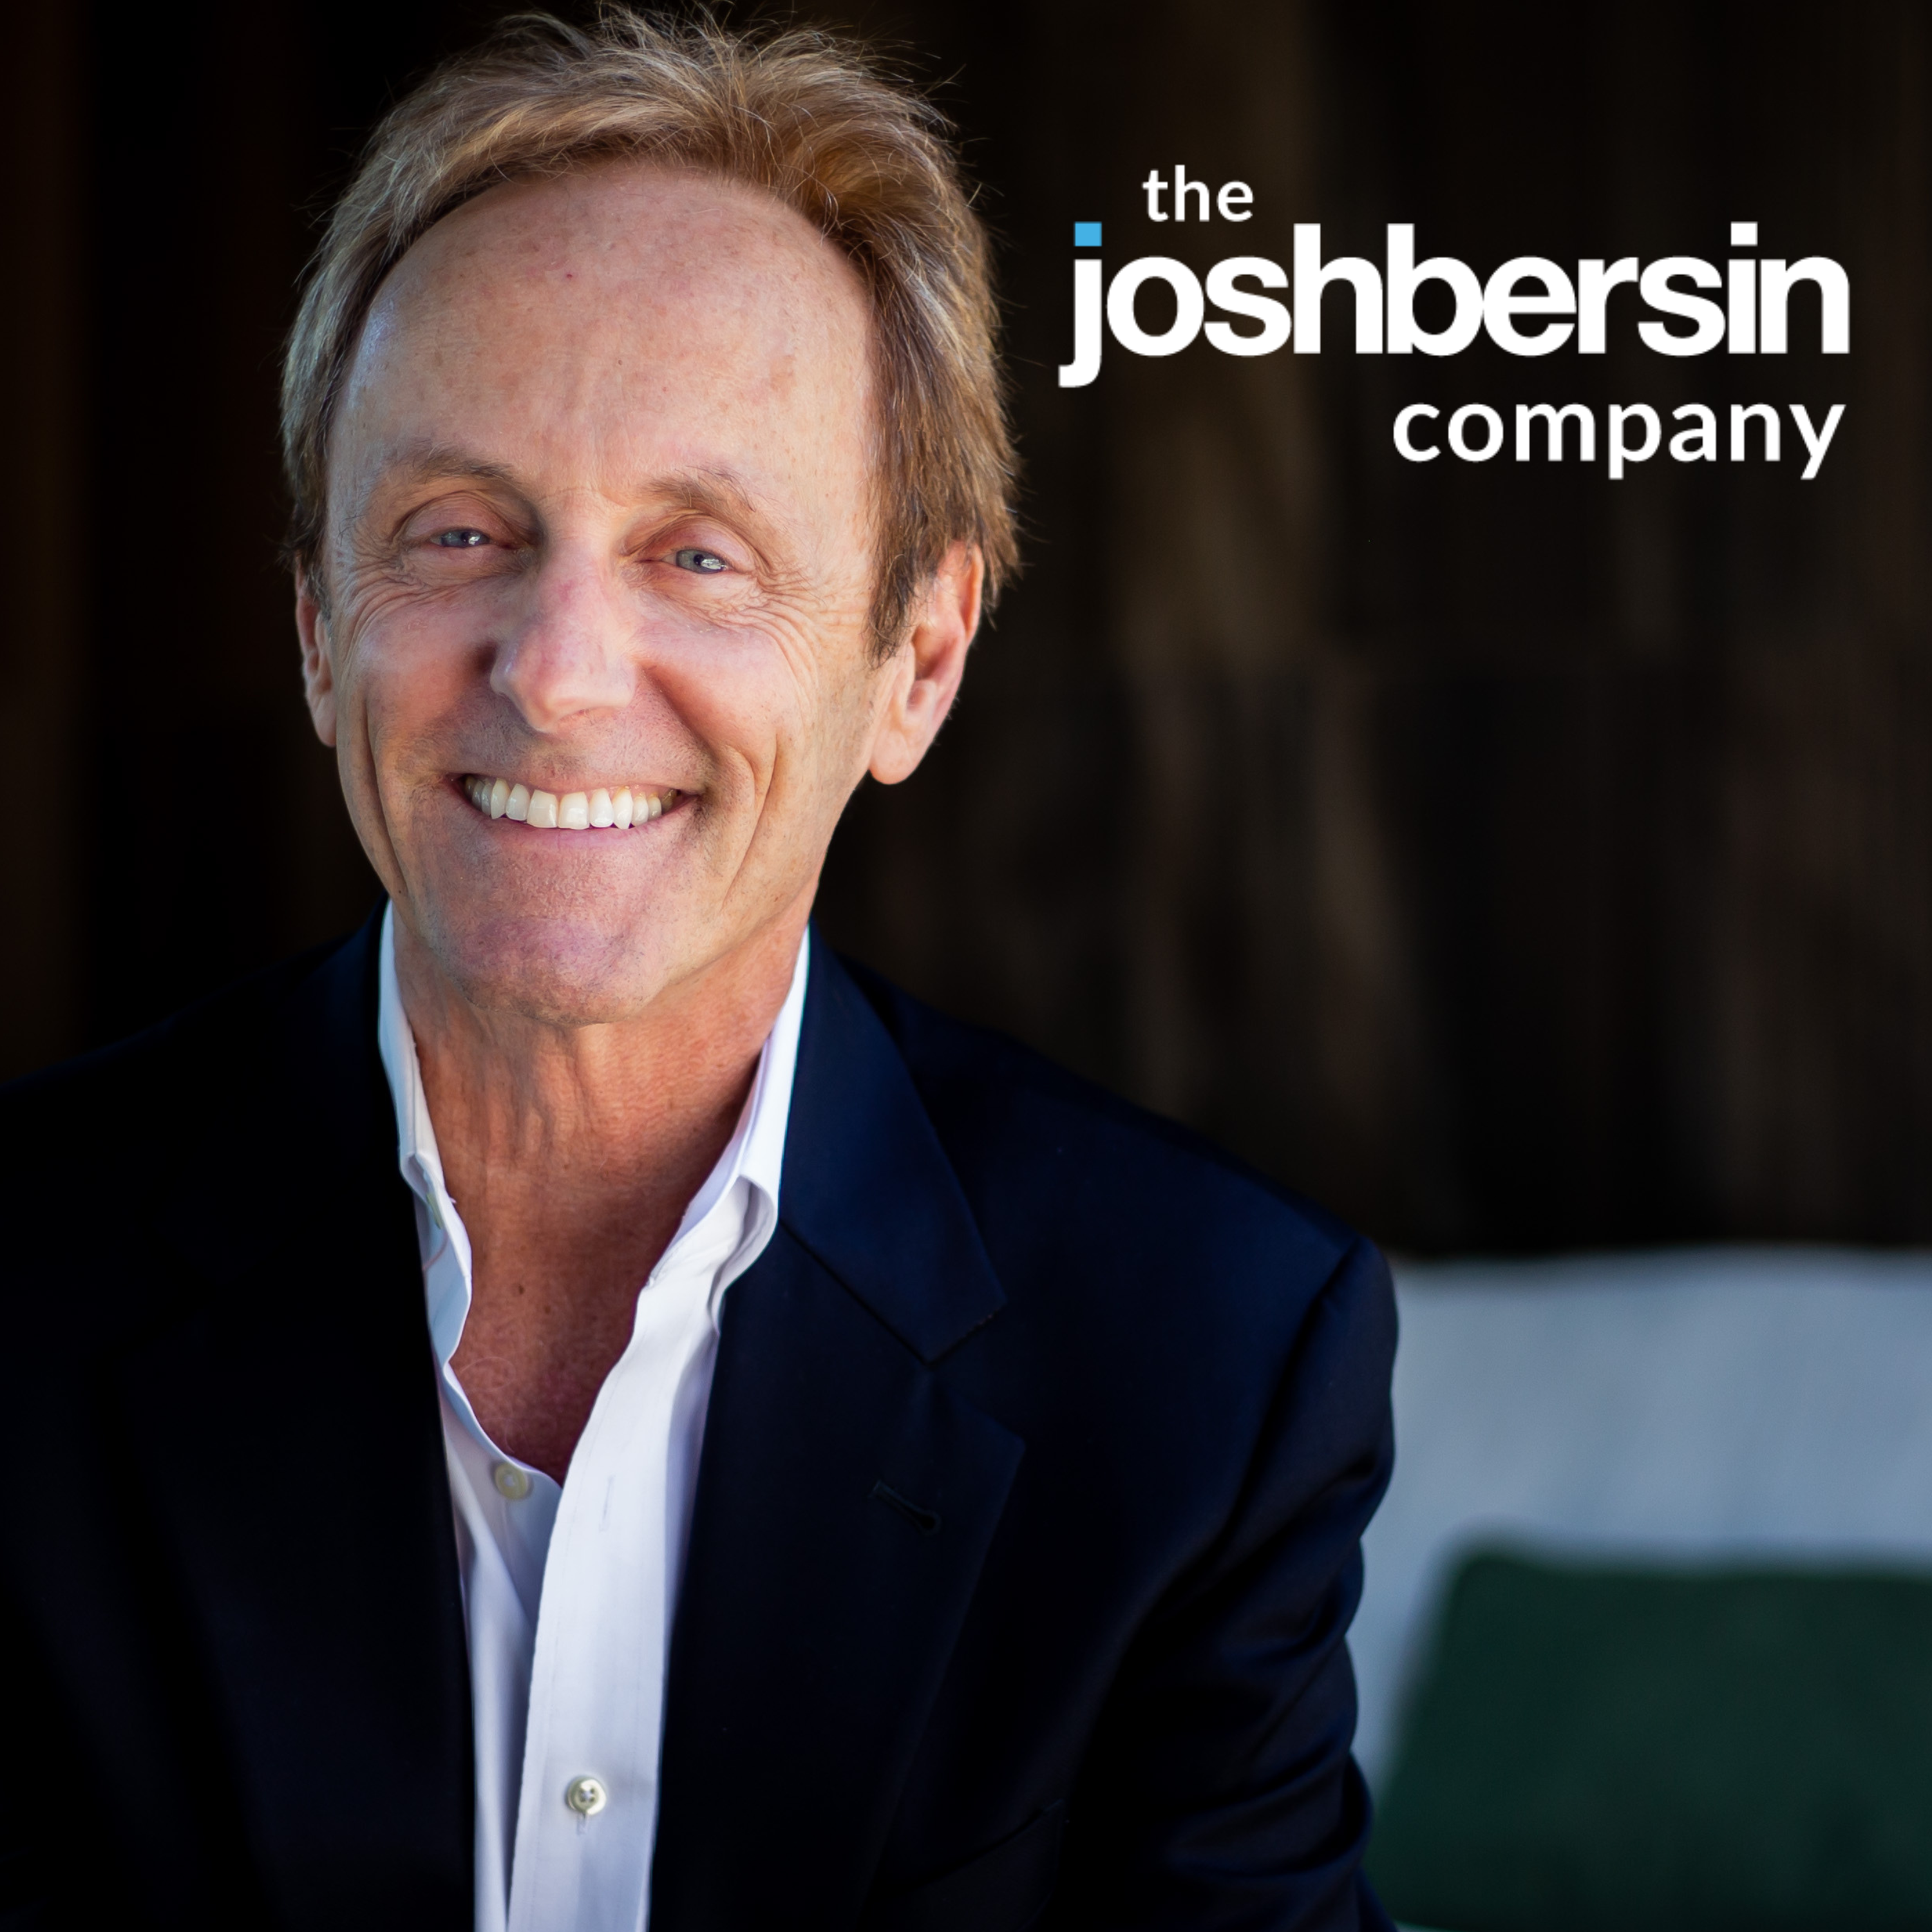 Under The Covers Of The Josh Bersin Academy. Now A Business Imperative.